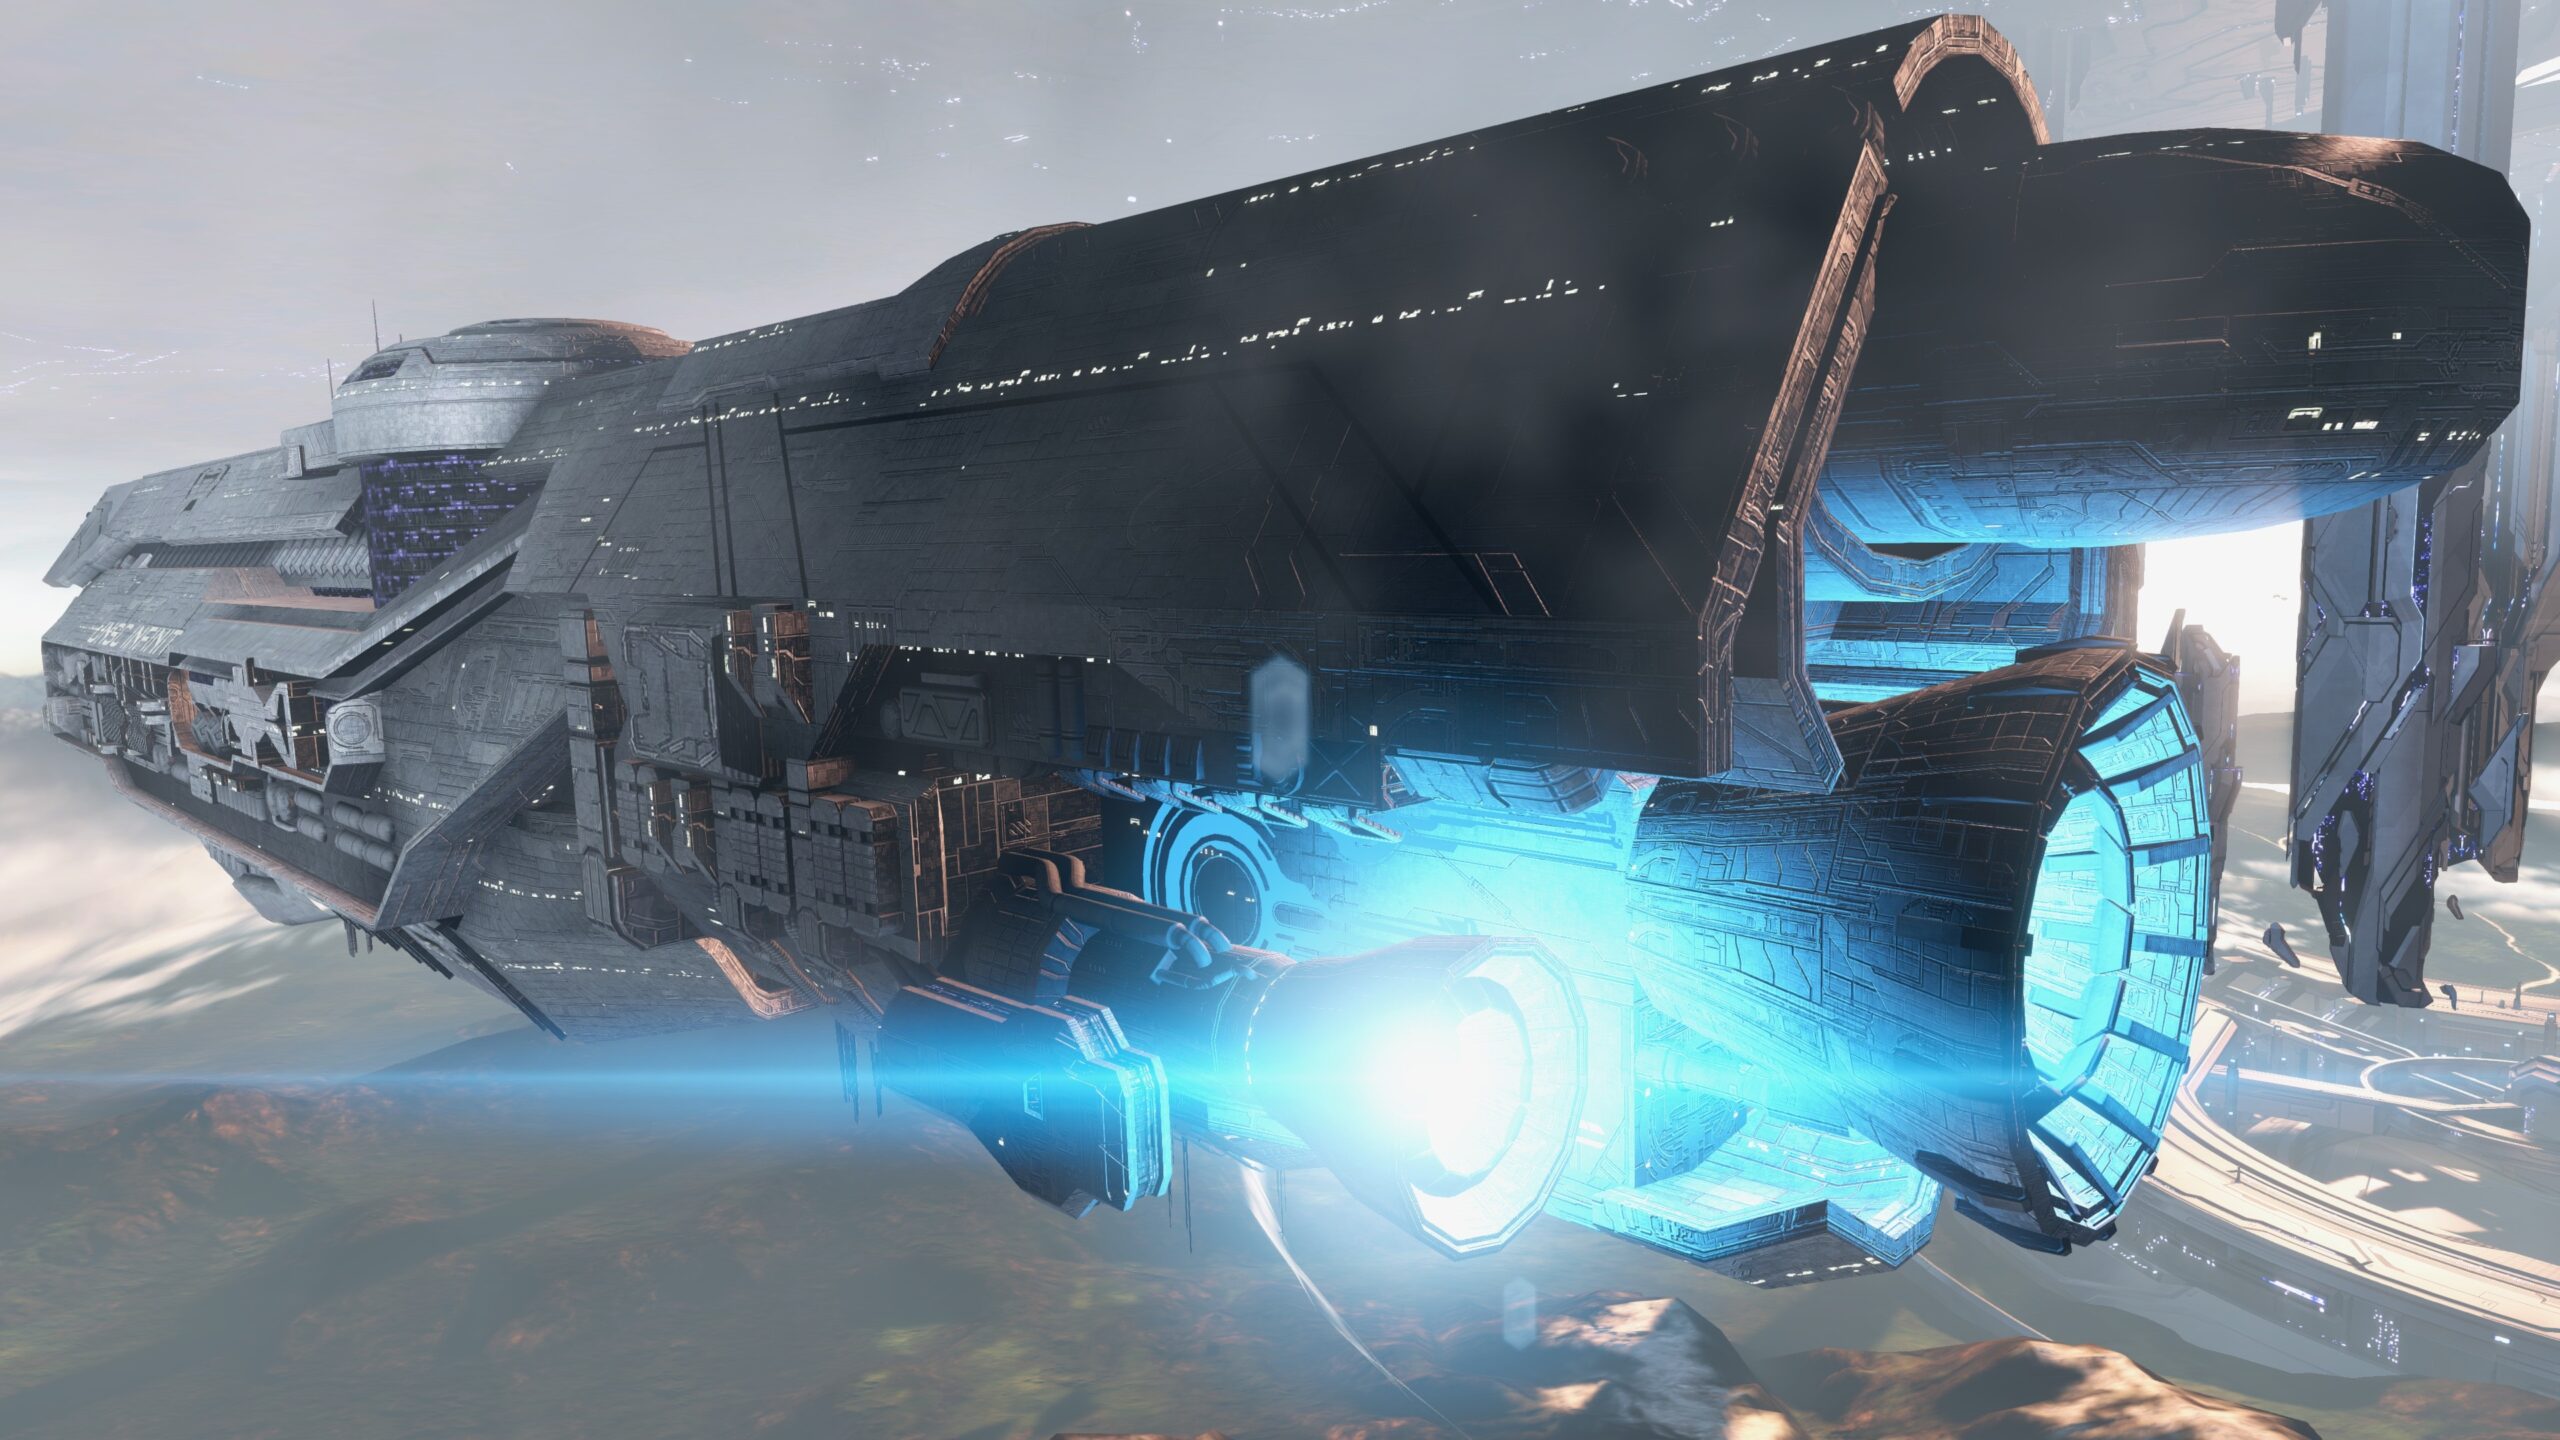 Screenshot of the UNSC Infinity in halo 4